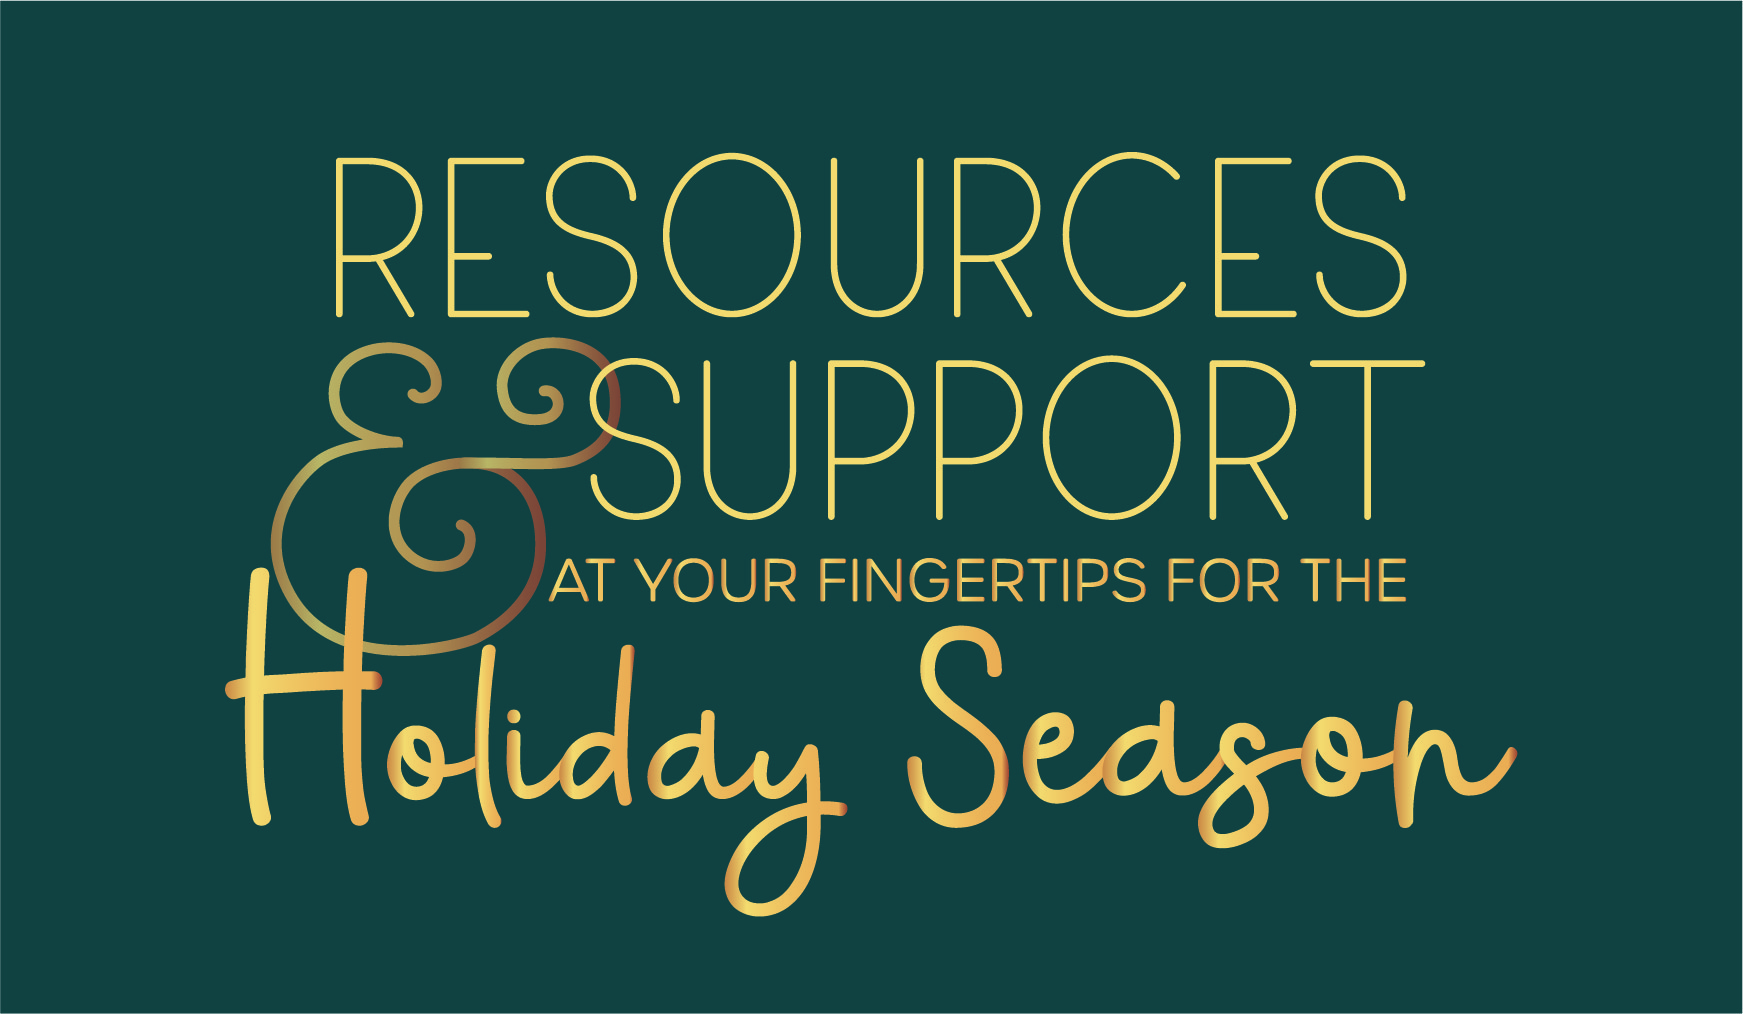 Resources and support for the holiday season